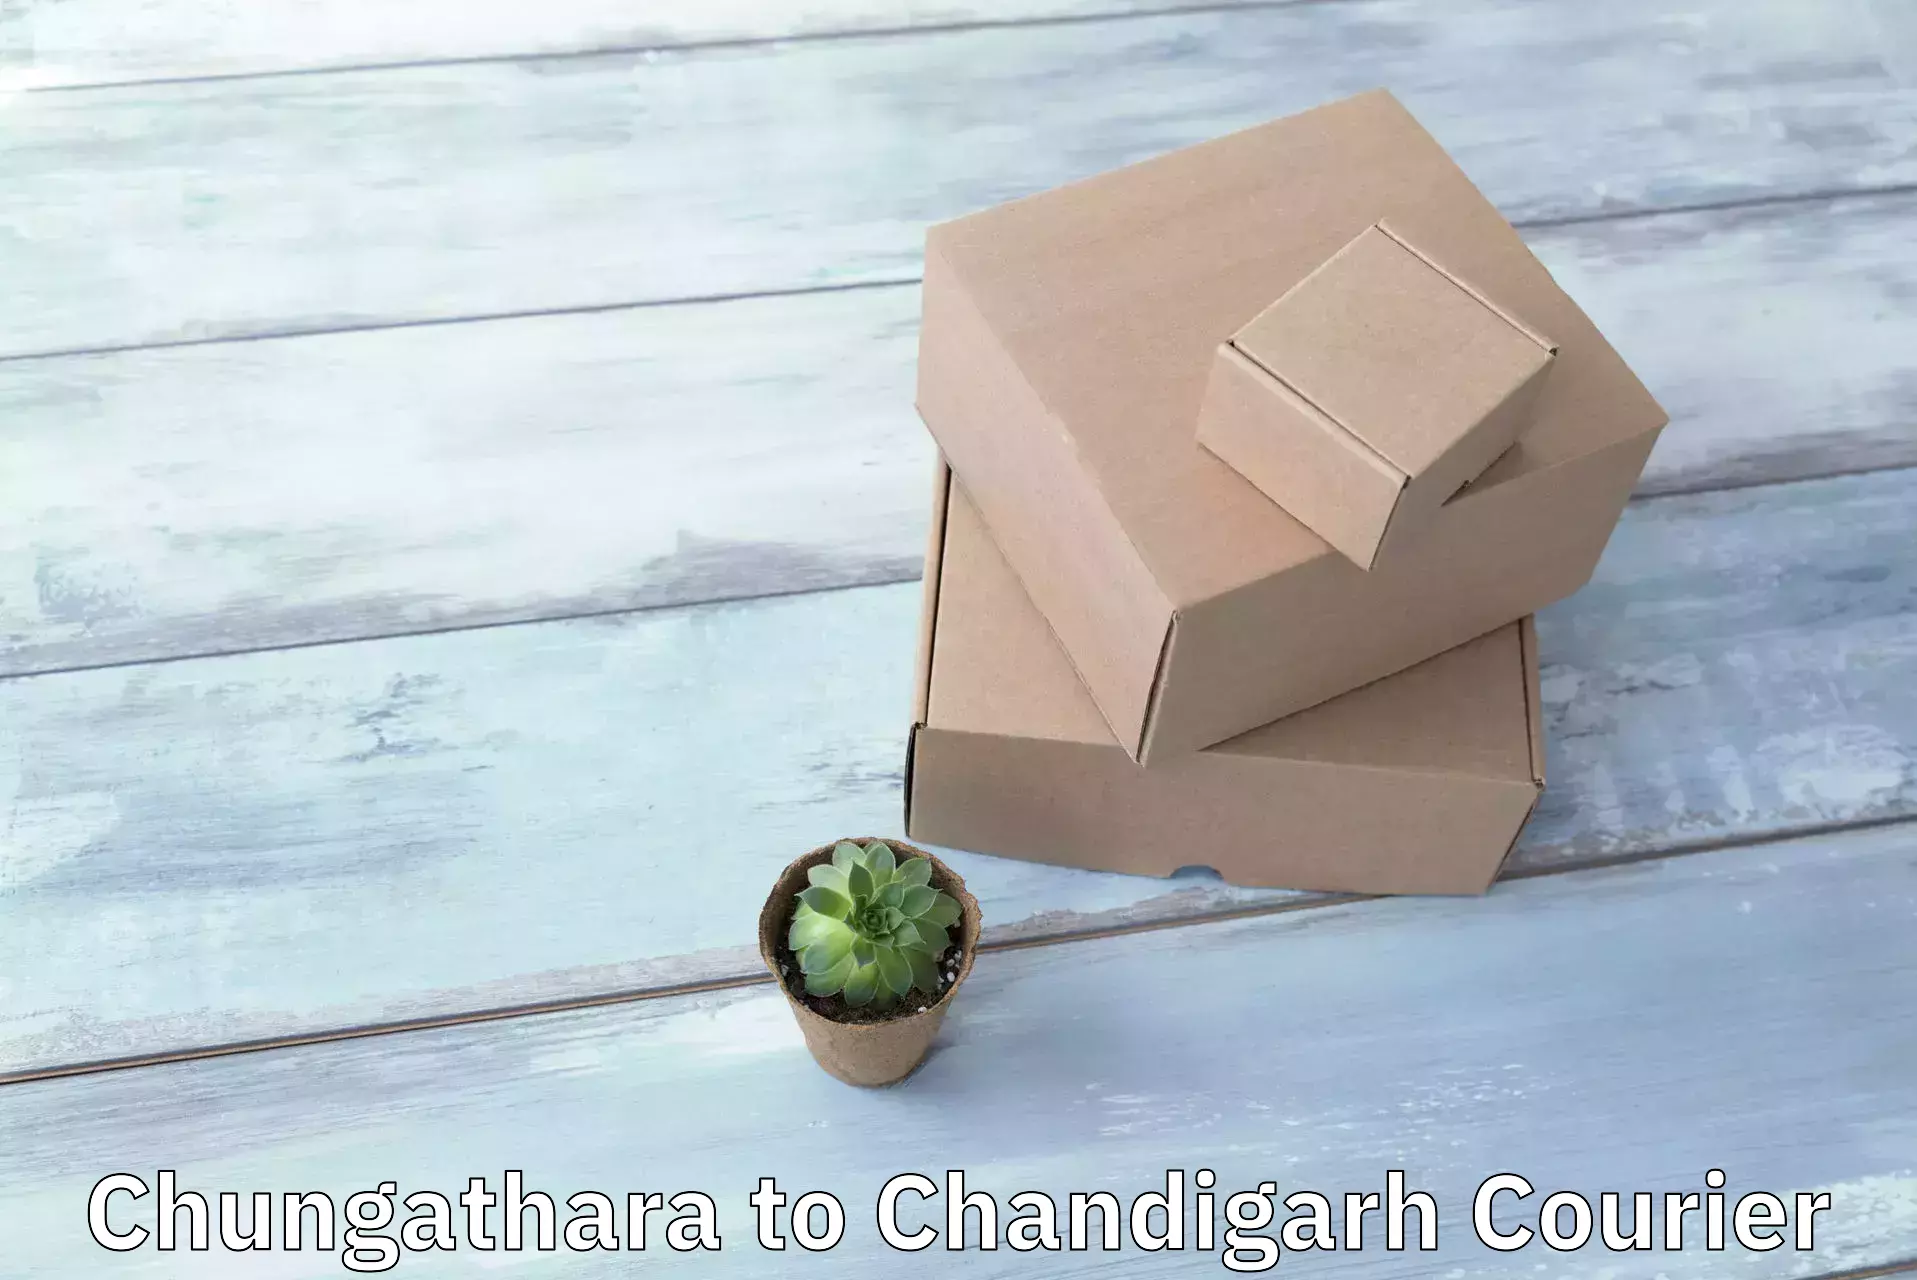 Courier service innovation Chungathara to Chandigarh